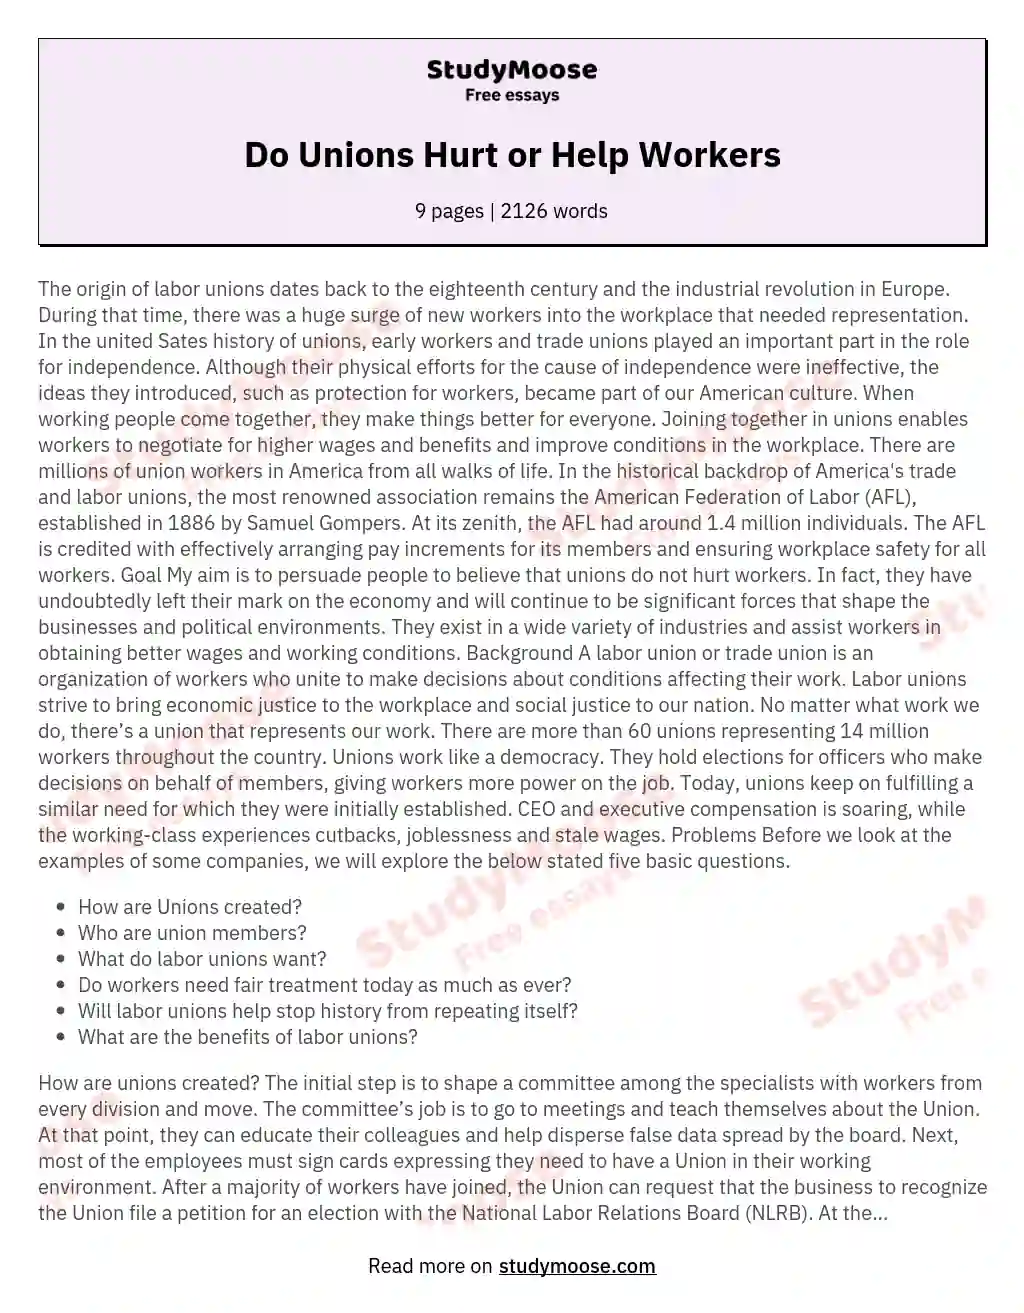 Do Unions Hurt or Help Workers essay